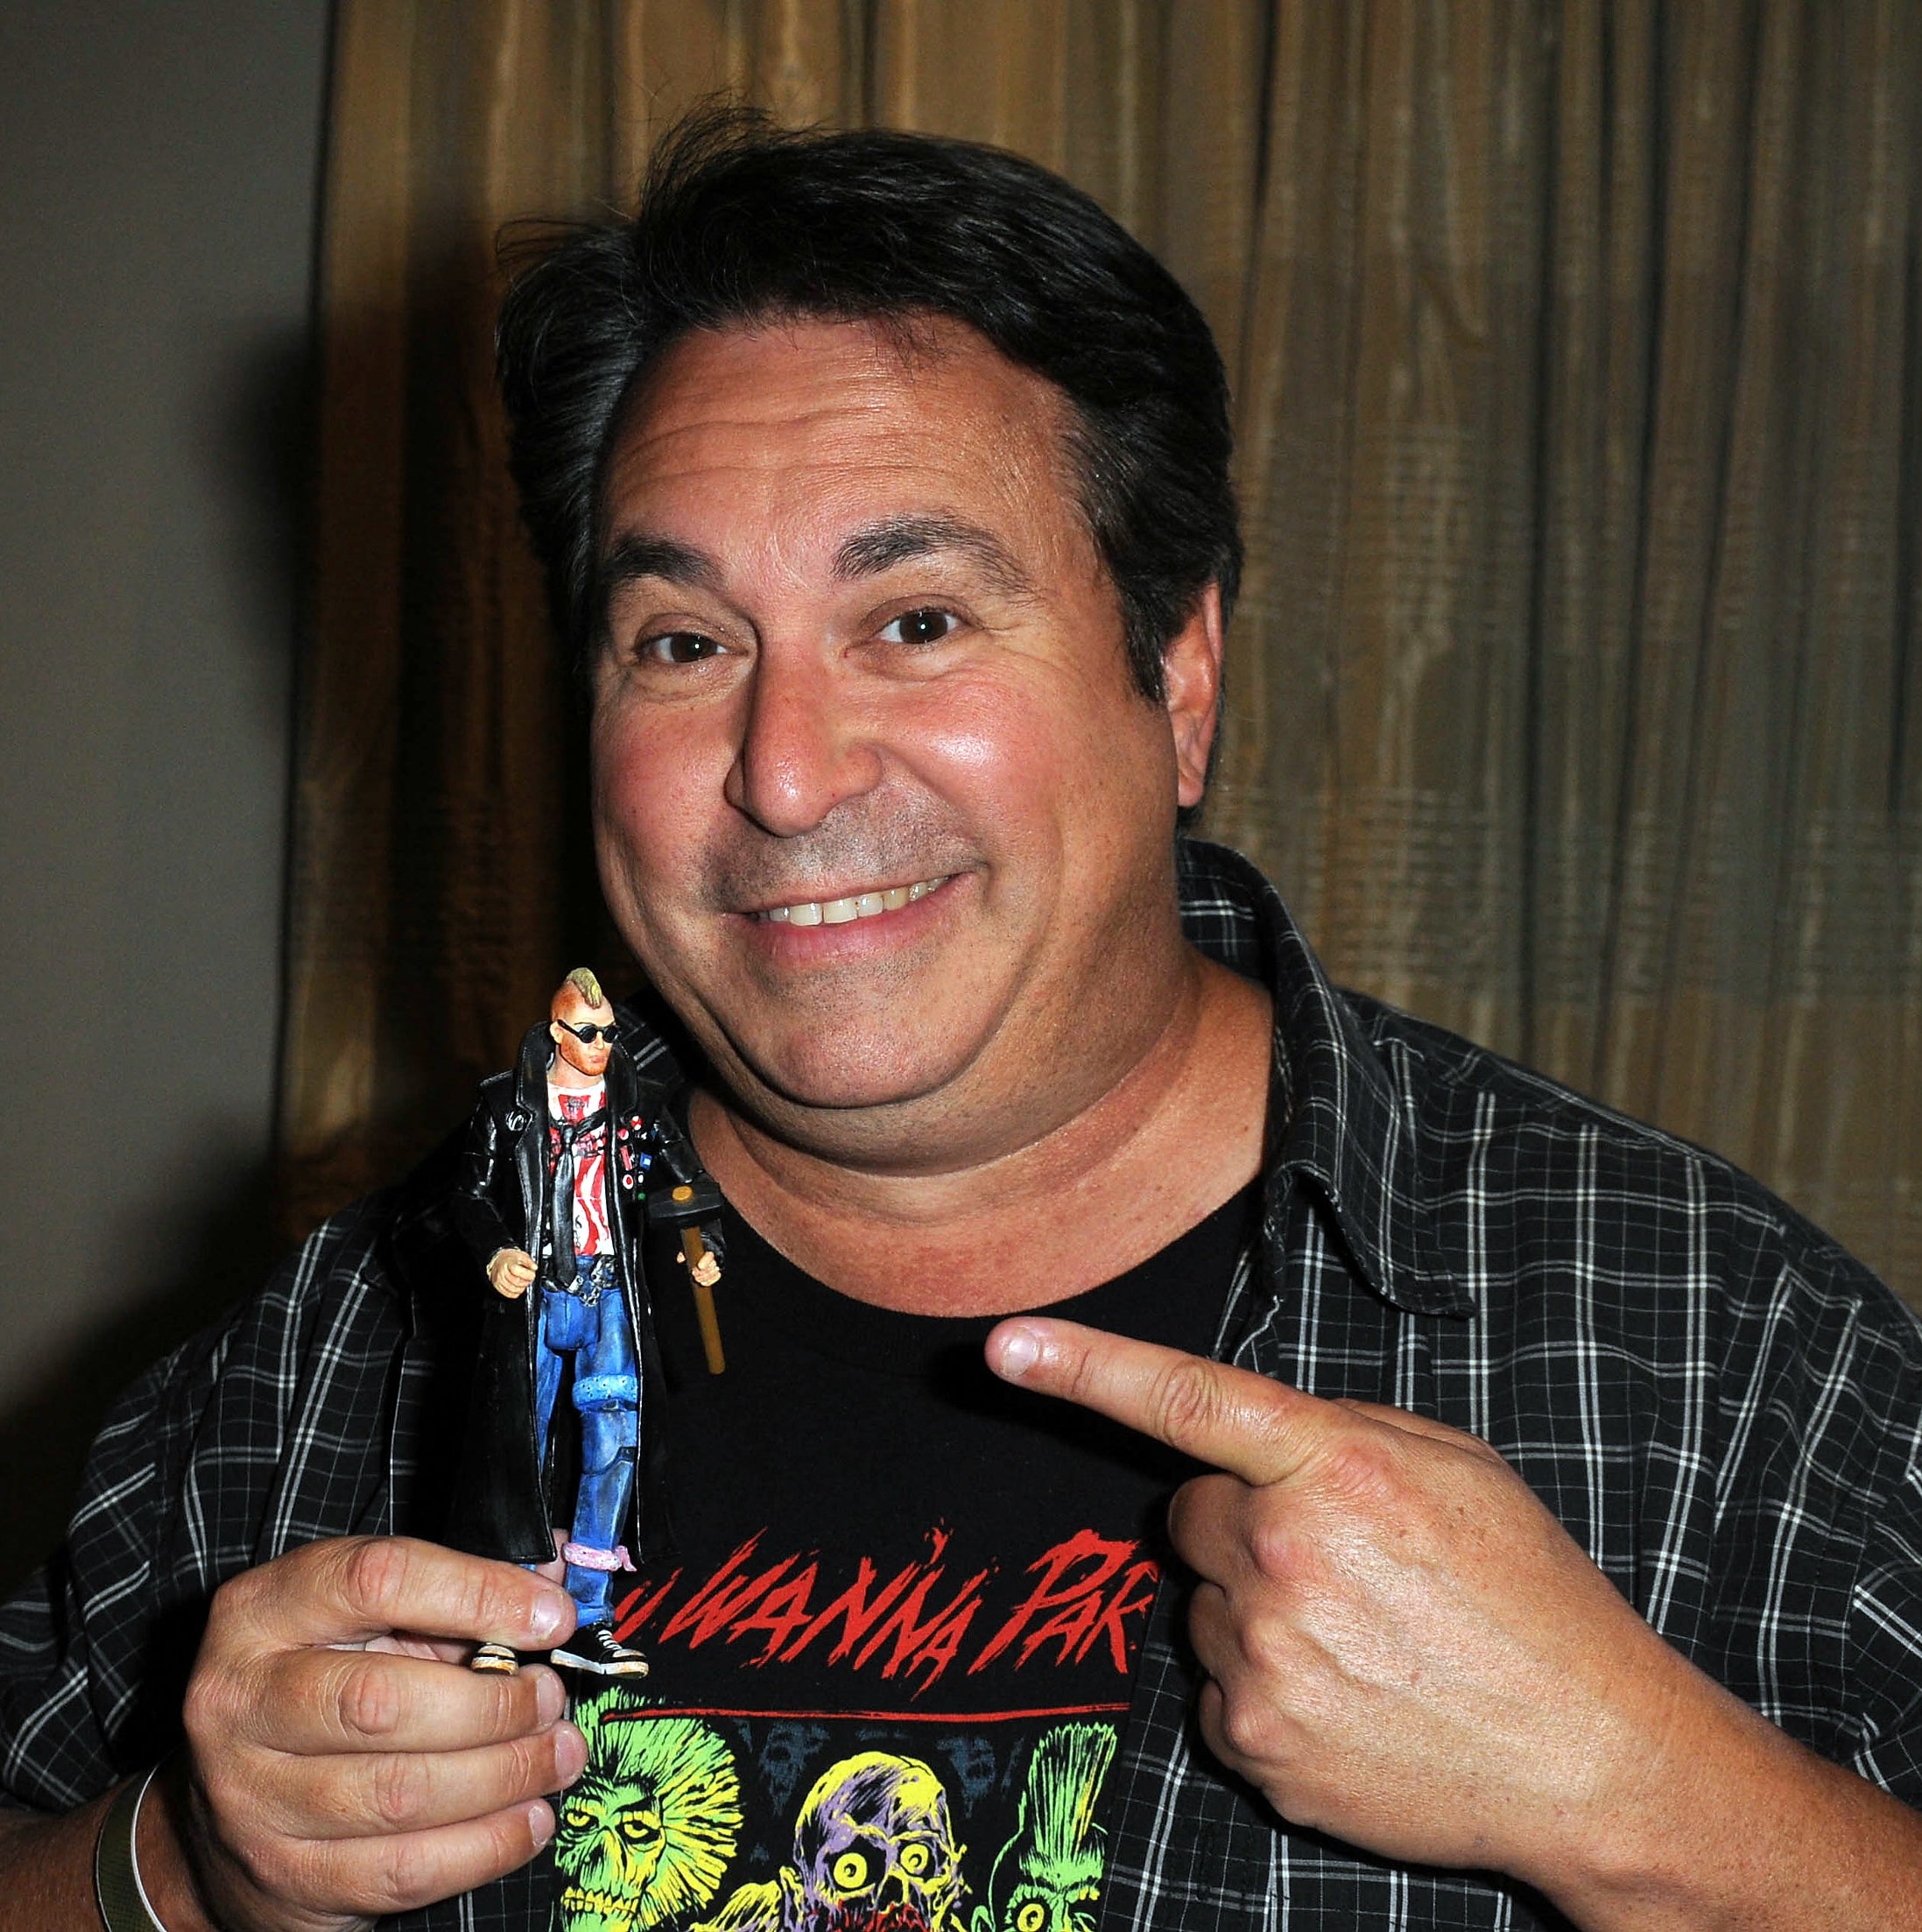 Brain smiling, holding and pointing to a small figurine, wearing a graphic t-shirt with plaid over-shirt